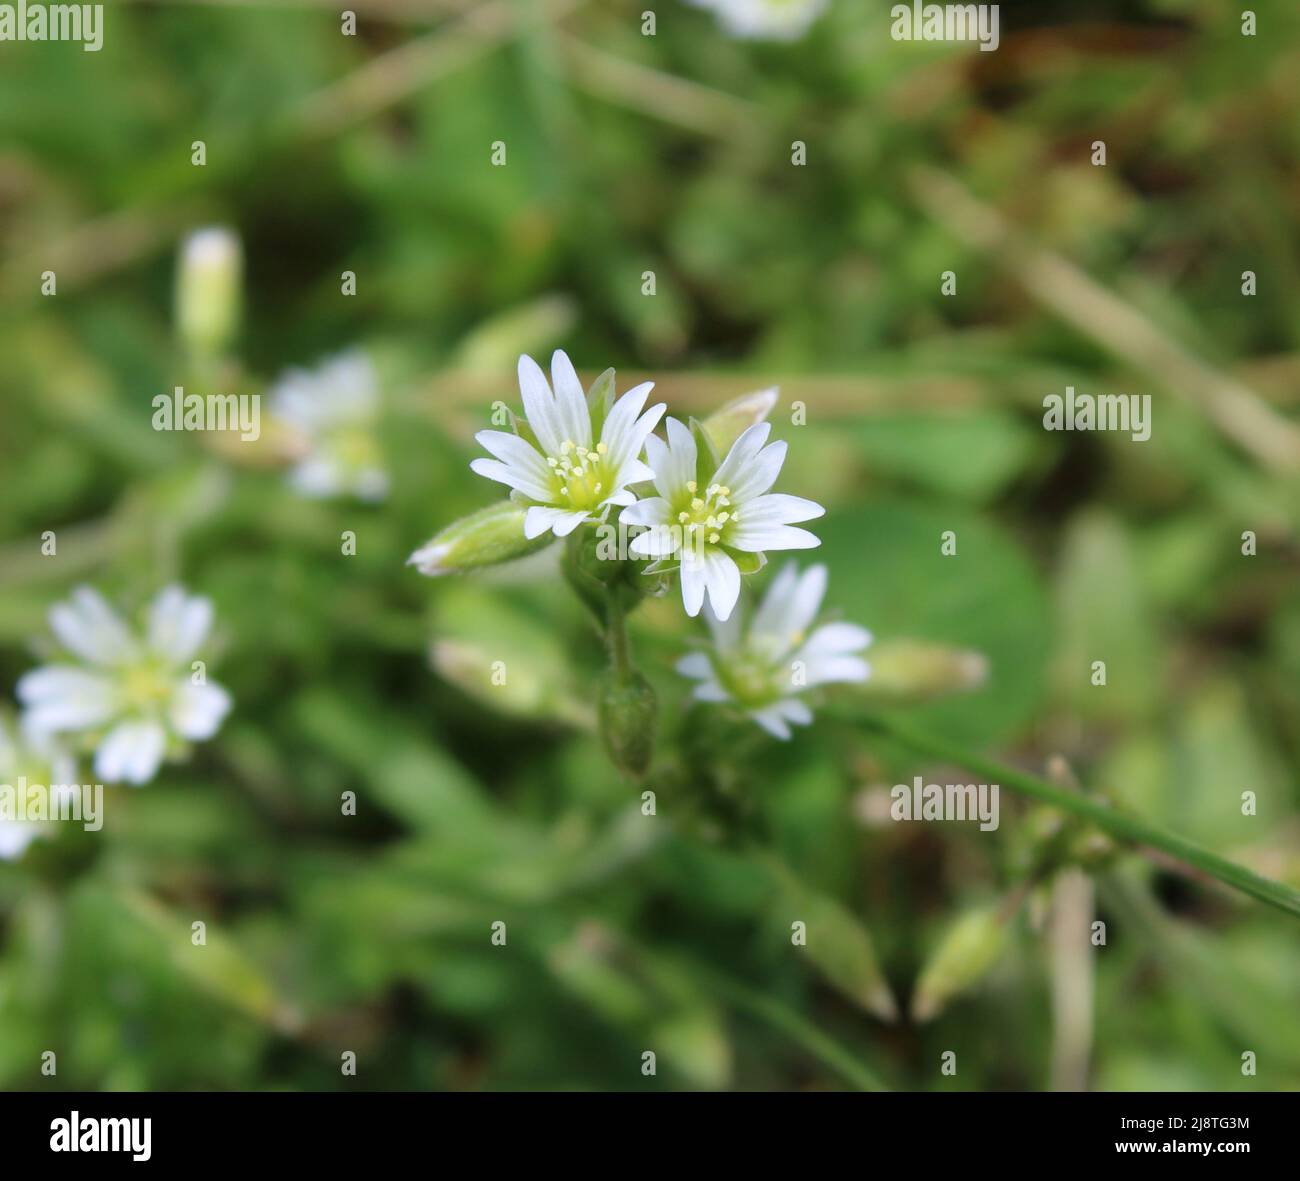 A Closeup on the Flowers of a Mouse-Ear Chickweed Plant Stock Photo